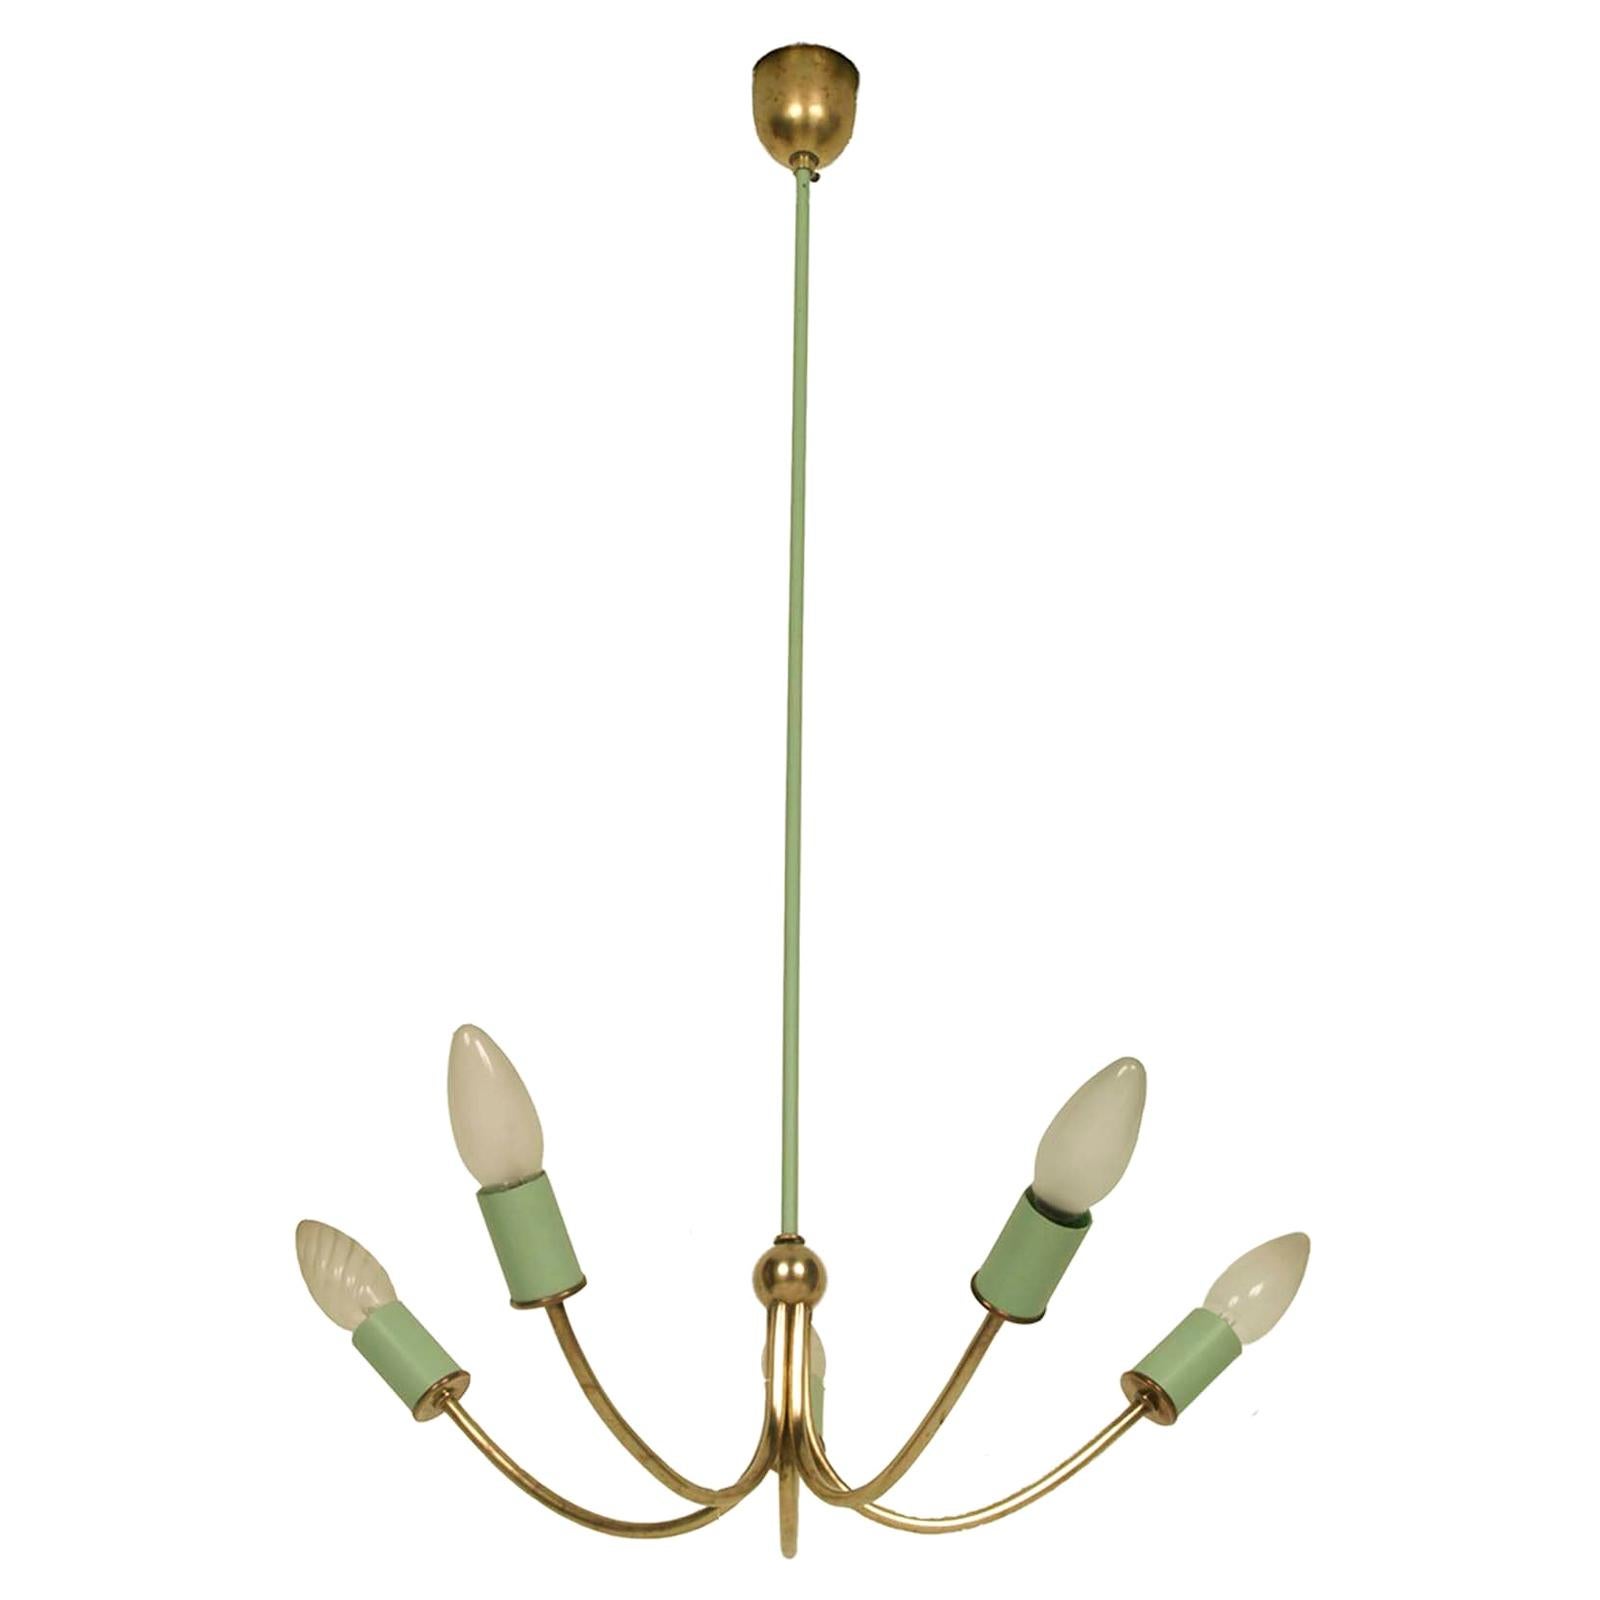 Italy 1920s Chandelier Art Deco, Gilt Brass and Painted Brass with Five Lights